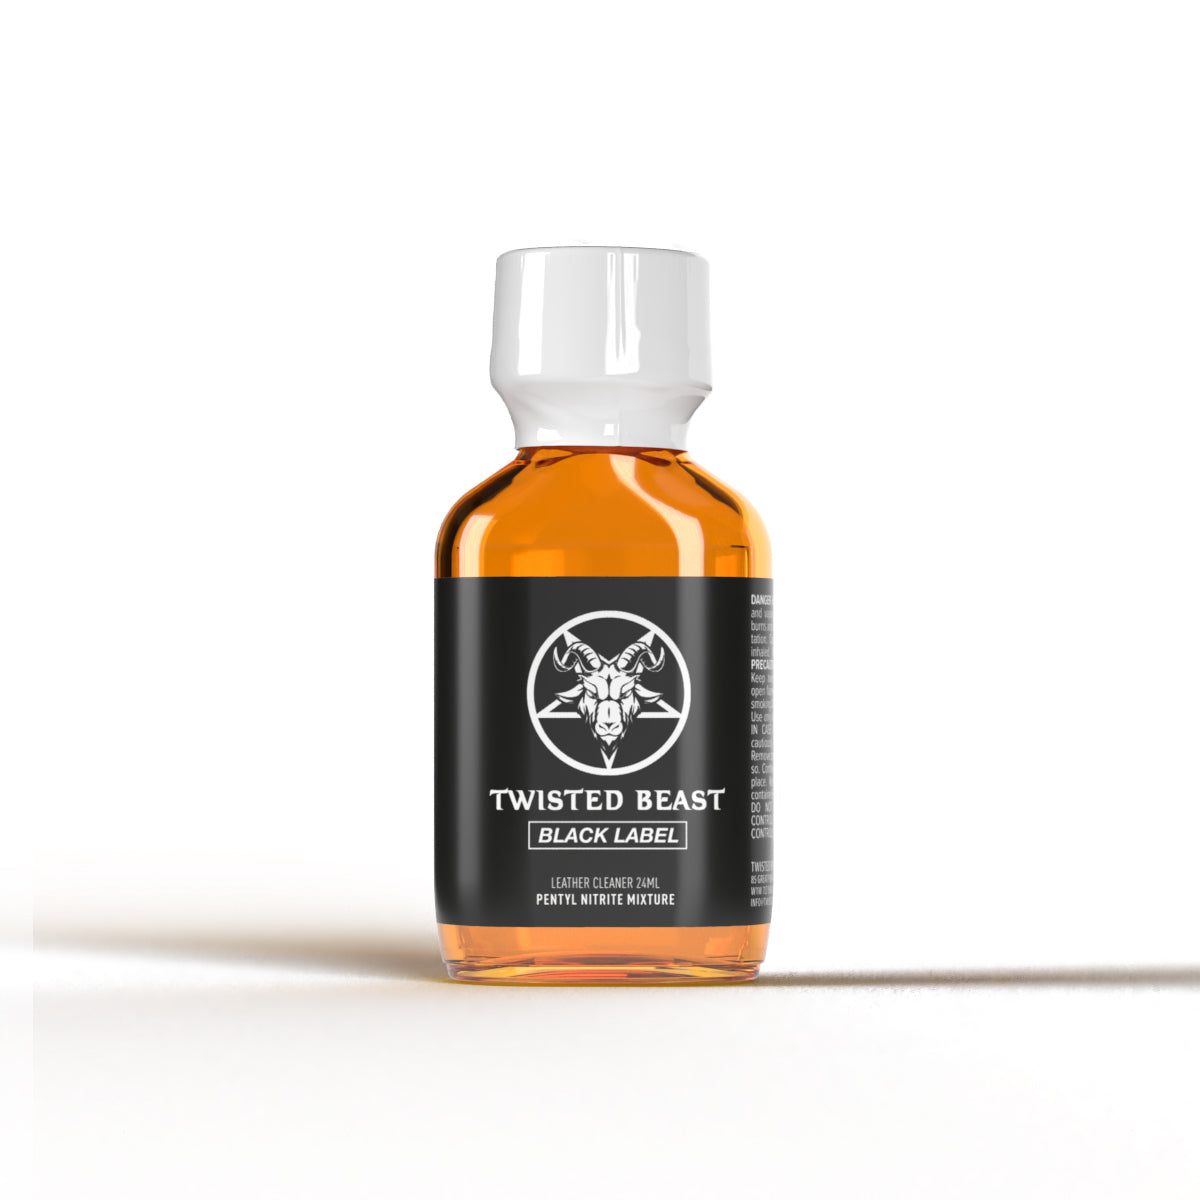 A product photo of a bottle of Twisted Beast Black Poppers (24ml).